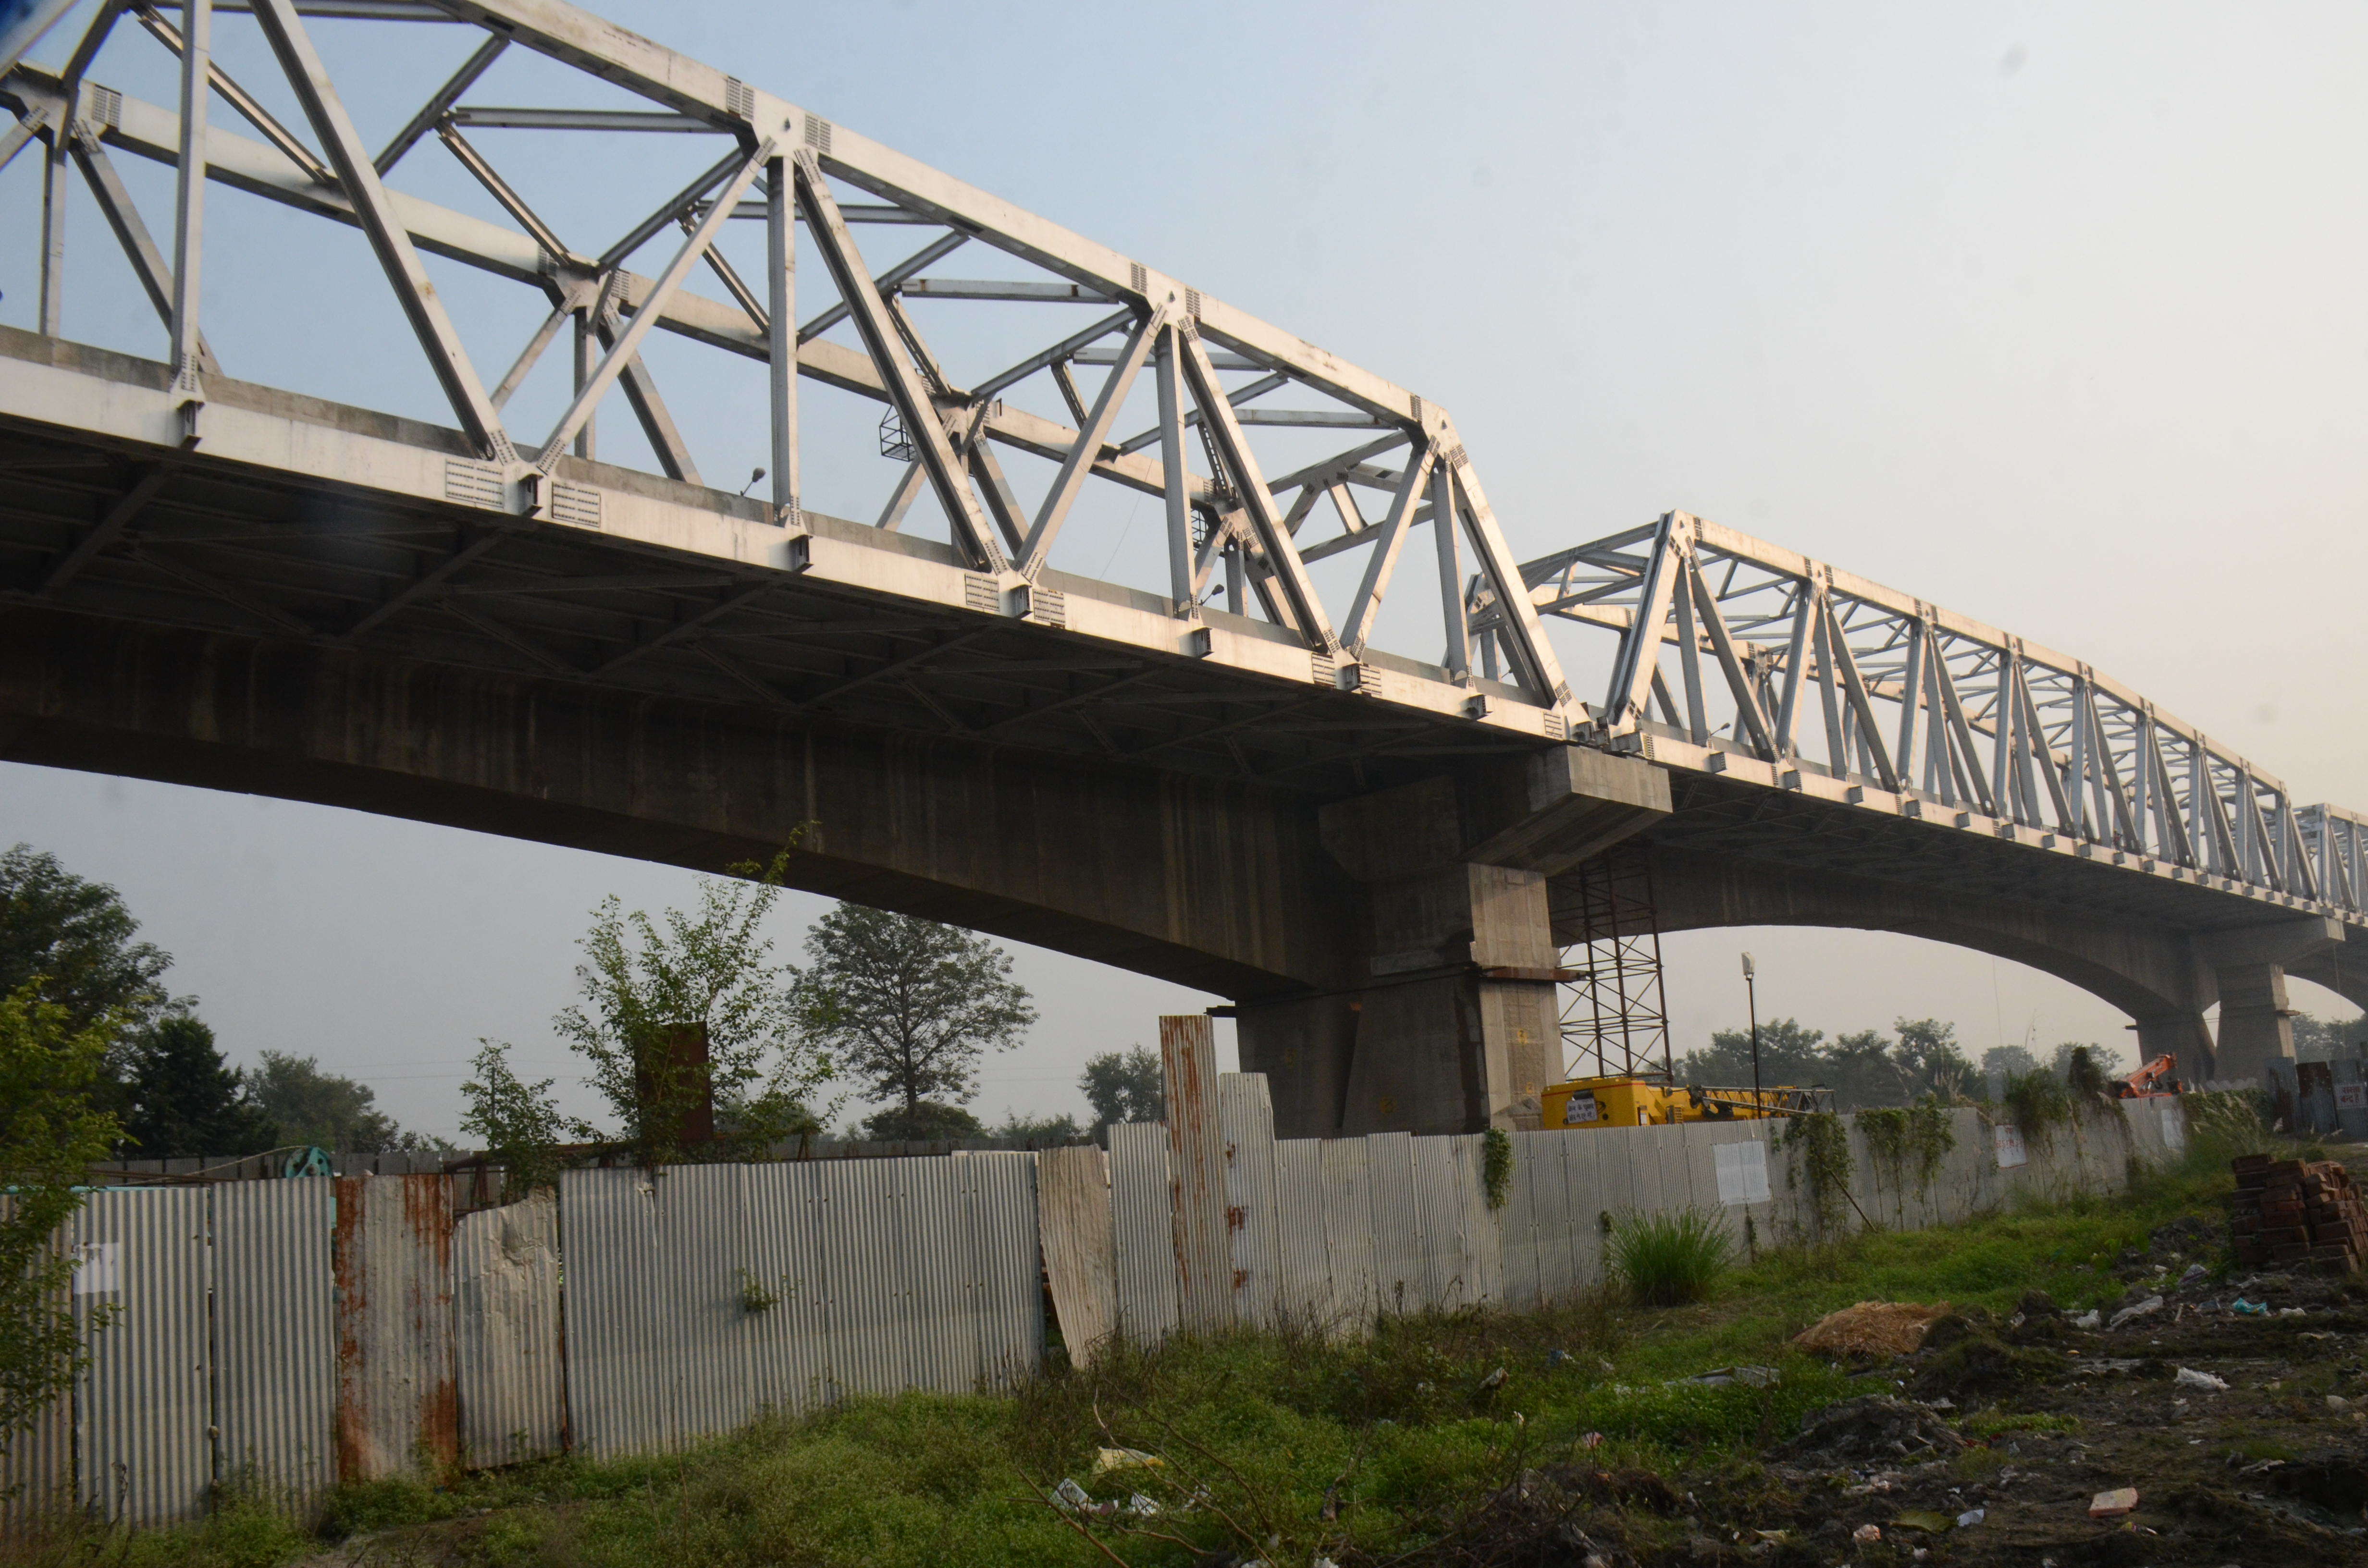 The western flank of the bridge is being rehabilitated in the first stage starting February 2017.